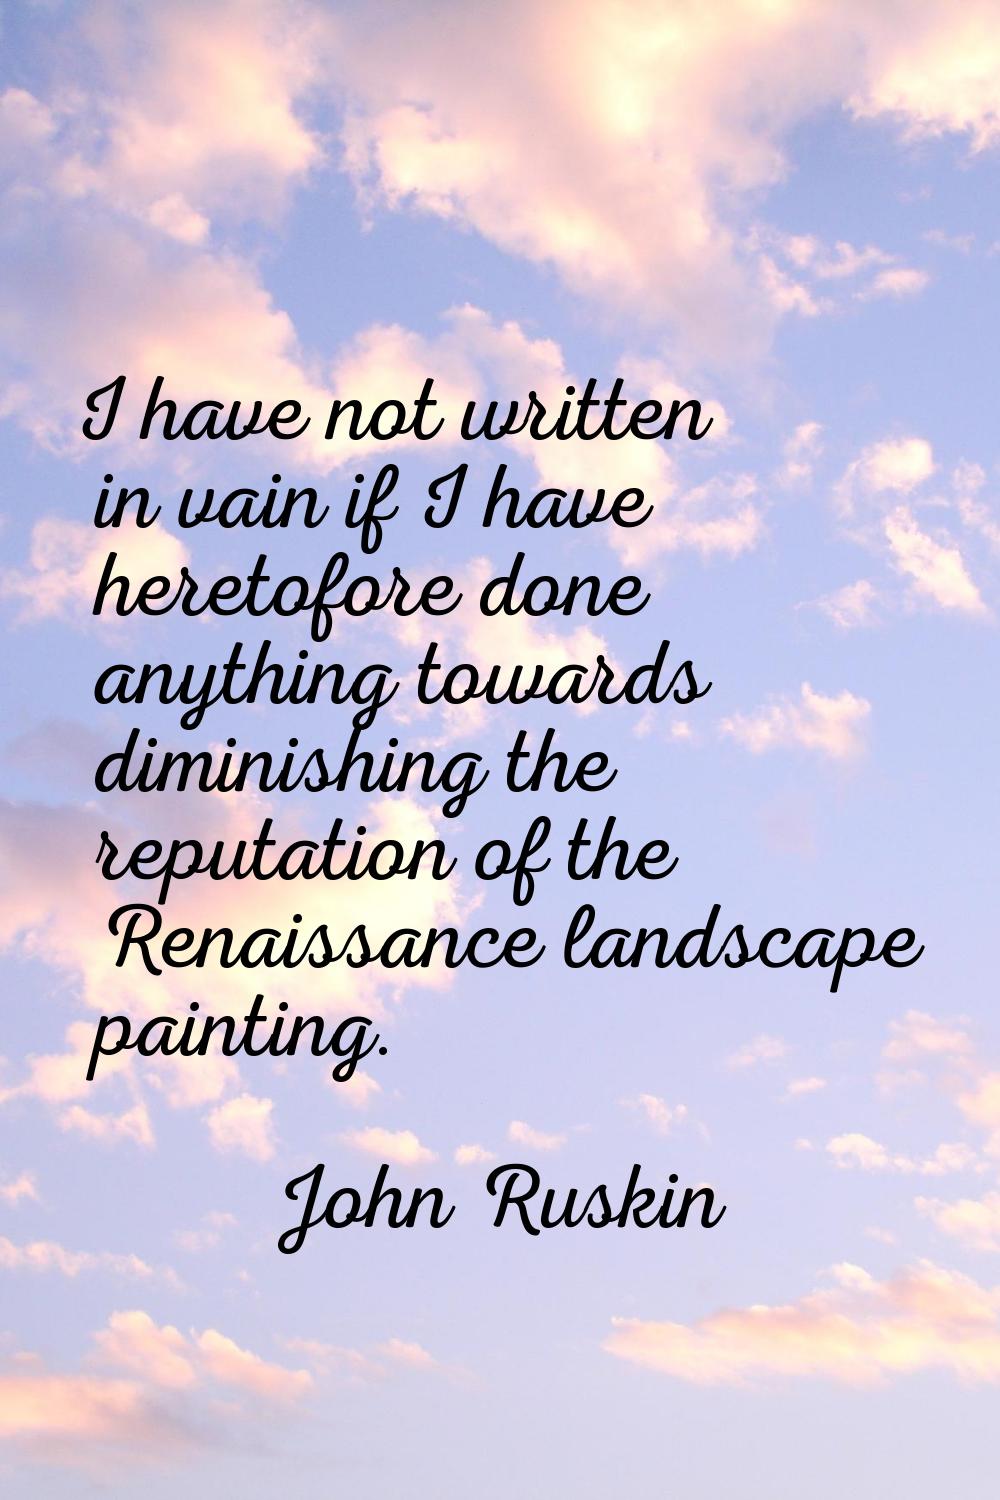 I have not written in vain if I have heretofore done anything towards diminishing the reputation of